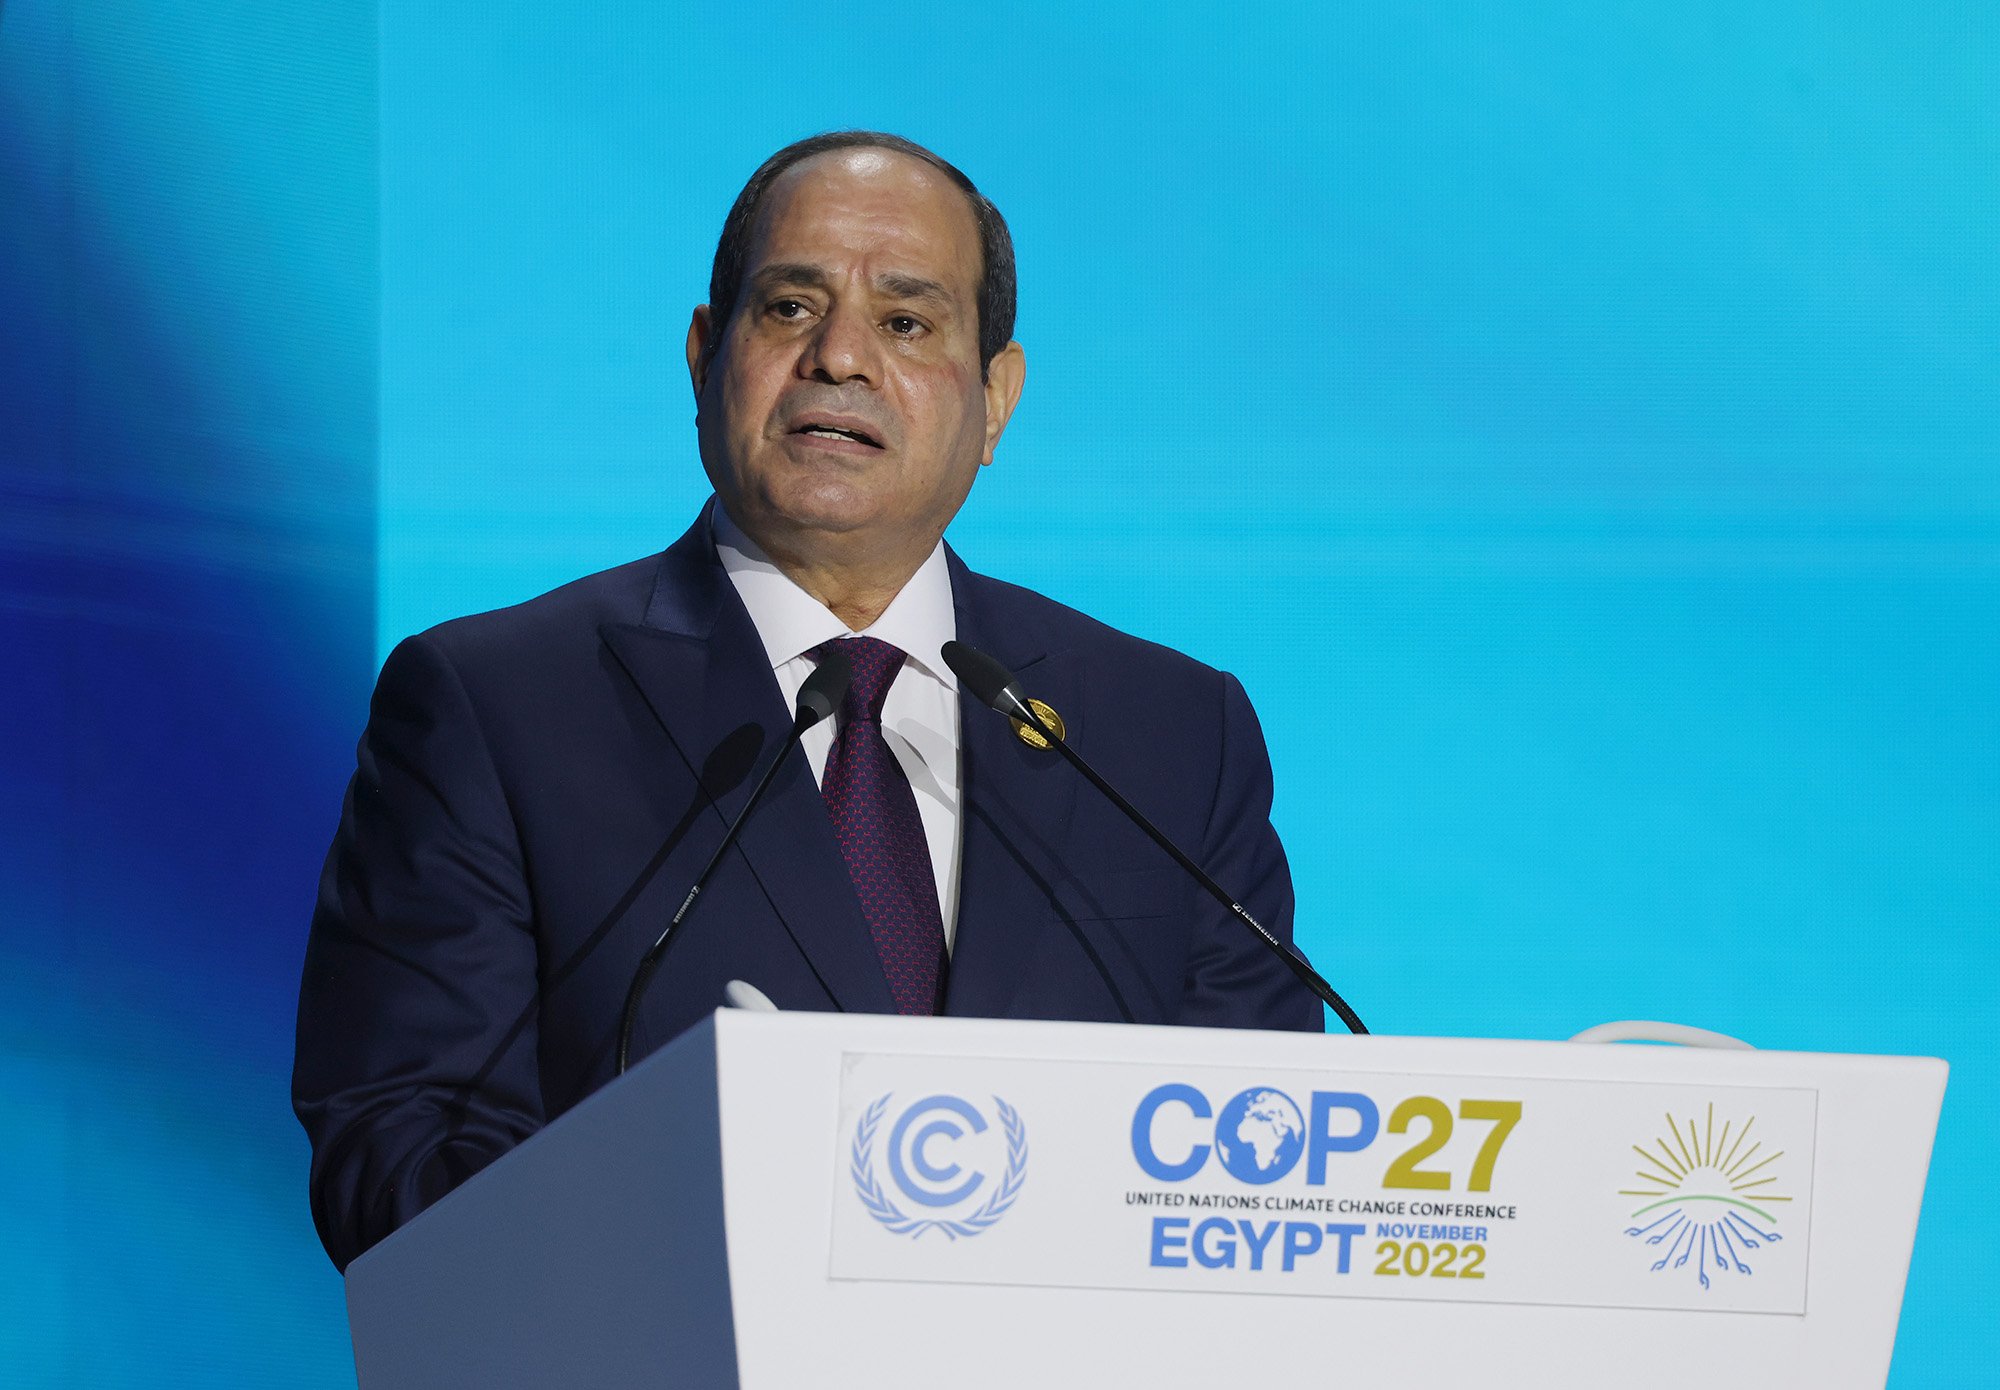 Egyptian President Abdel Fattah El-Sisi speaks during the Sharm El-Sheikh Climate Implementation Summit (SCIS) of the UNFCCC COP27 climate conference on November 7.